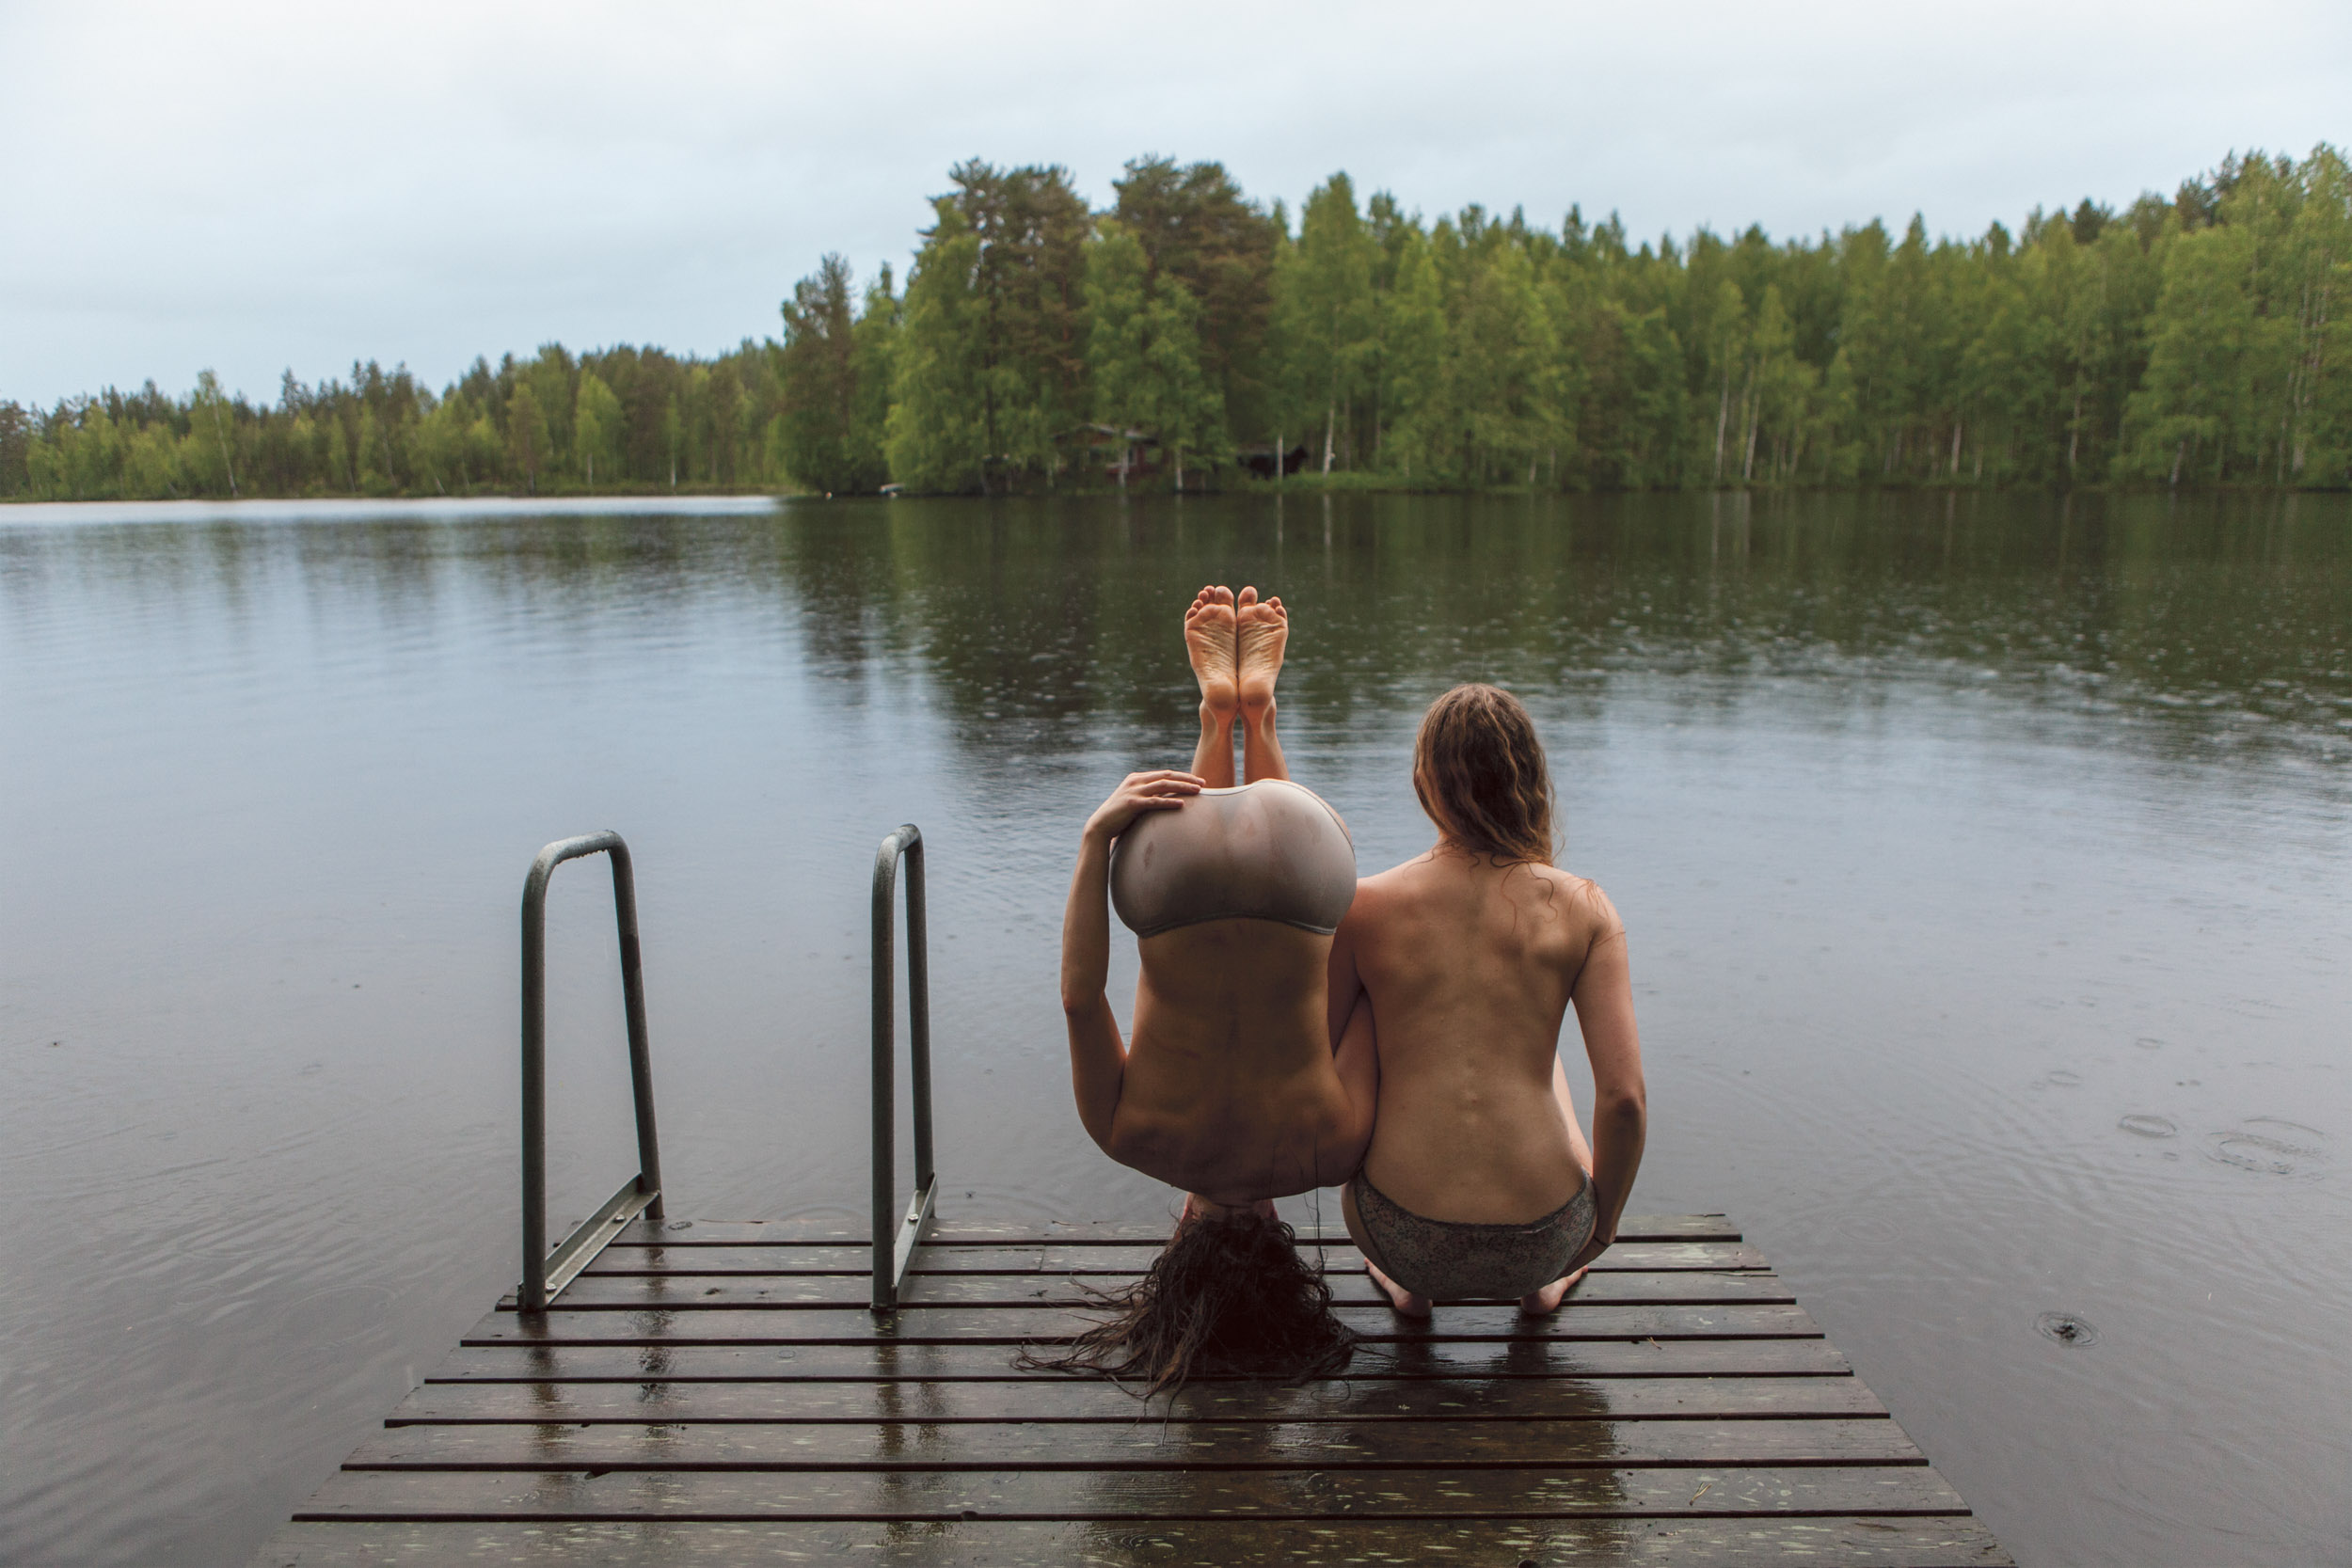 The Forest Project in Finland by Ben Hopper (2015)